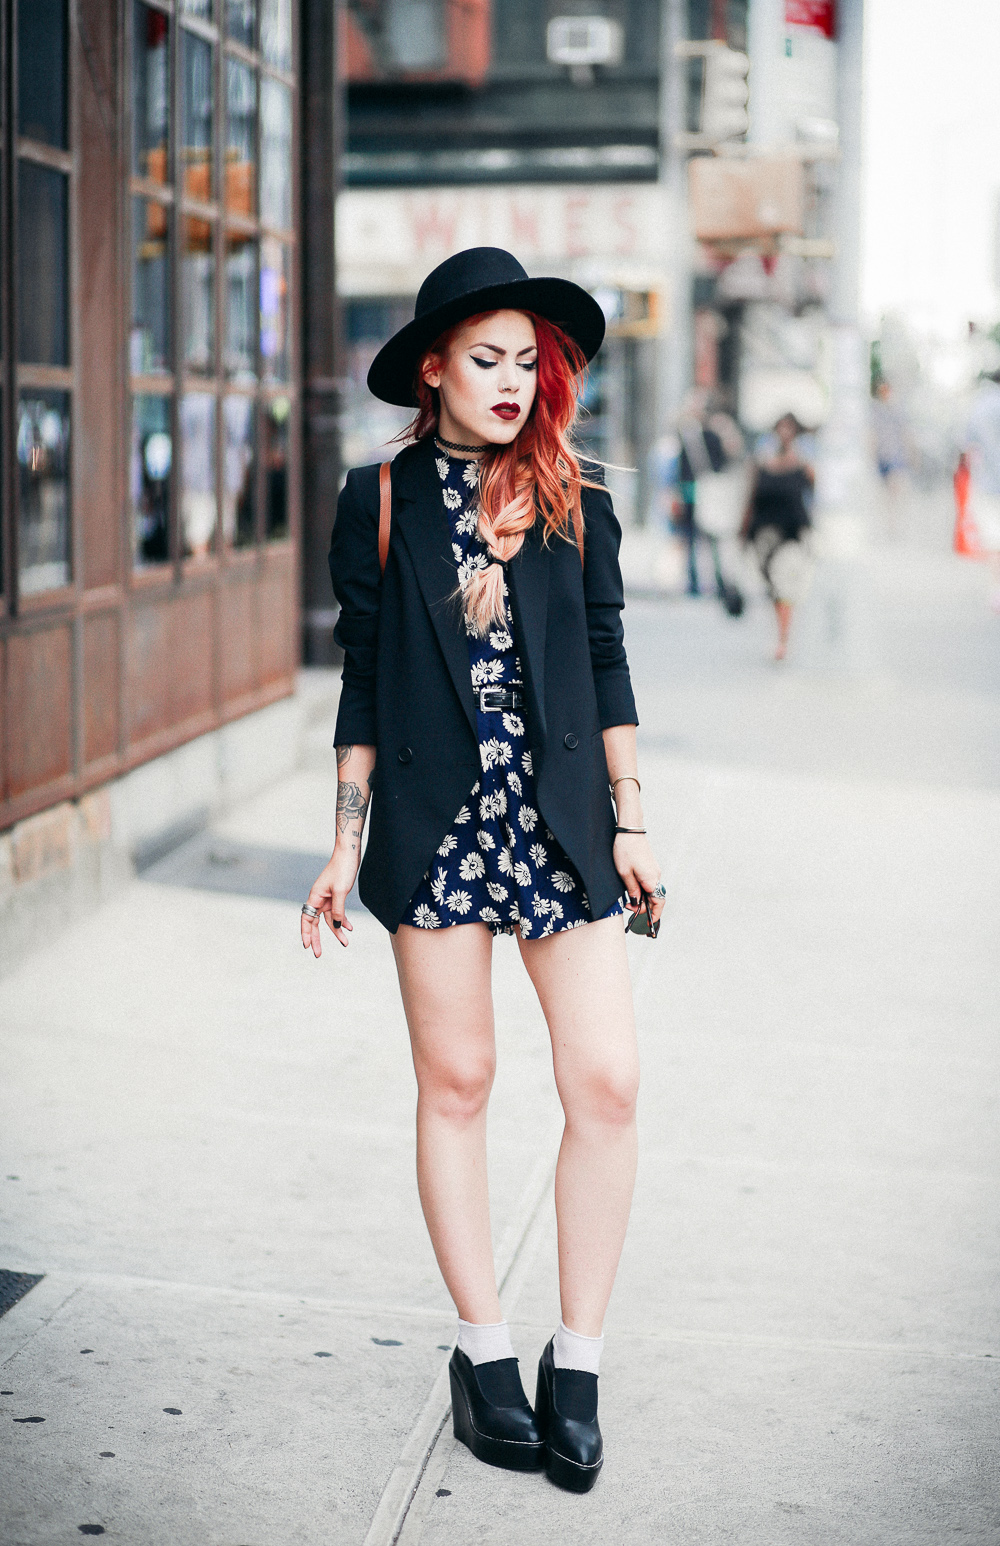 Le Happy wearing ASOS floral romper and Theory blazer